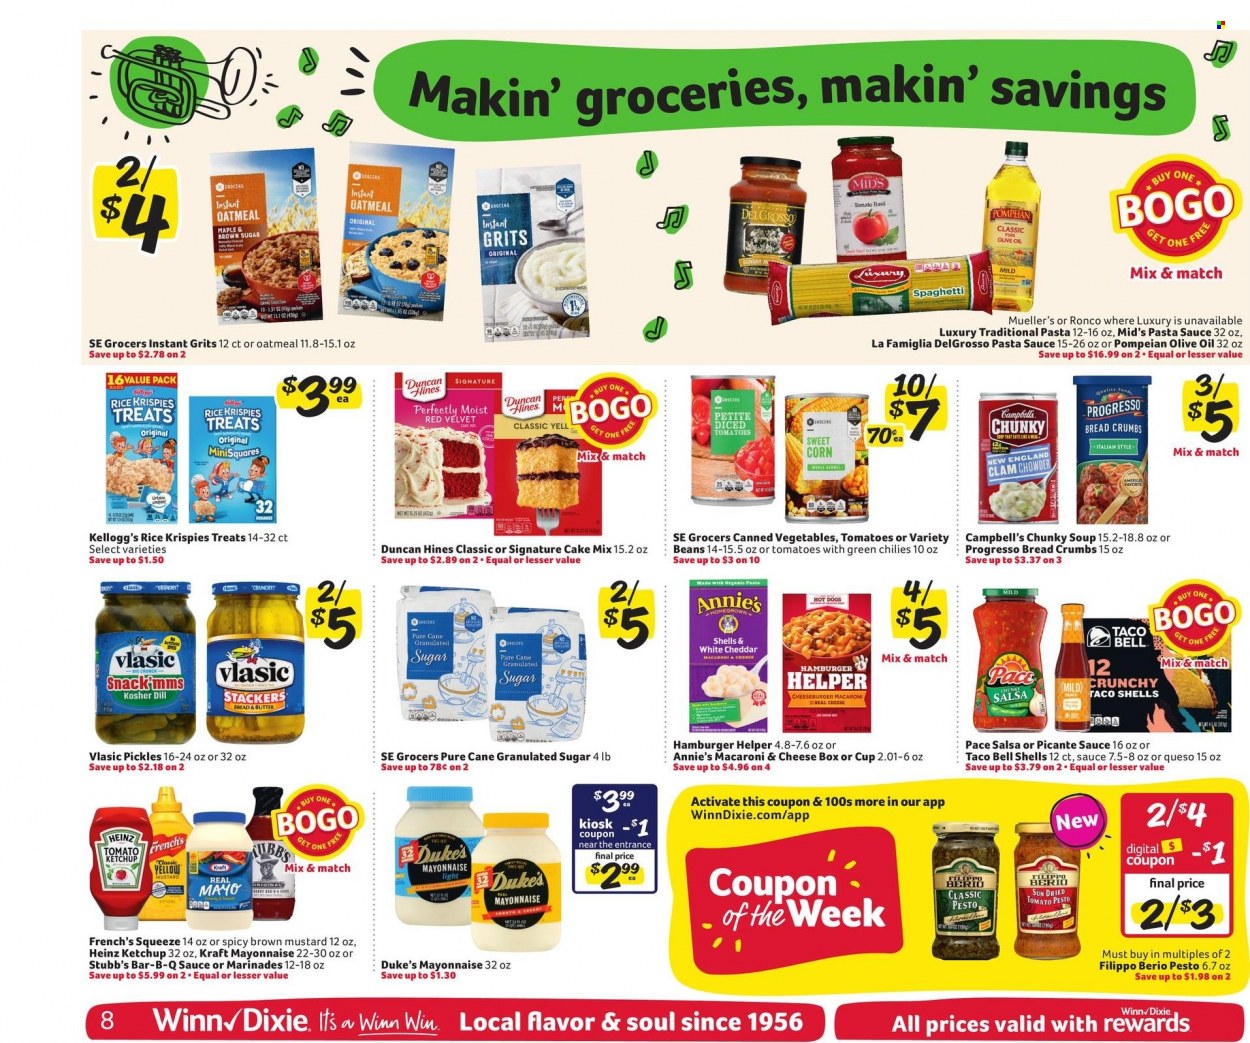 thumbnail - Winn Dixie Flyer - 10/27/2021 - 11/02/2021 - Sales products - breadcrumbs, cake mix, beans, corn, sweet corn, Campbell's, macaroni & cheese, spaghetti, hot dog, pasta sauce, soup, cheeseburger, Progresso, Annie's, Kraft®, butter, mayonnaise, snack, Kellogg's, granulated sugar, oatmeal, grits, dried tomatoes, Heinz, pickles, canned vegetables, clam chowder, Rice Krispies, esponja, dill, mustard, ketchup, pesto, salsa, olive oil, oil, cup. Page 8.